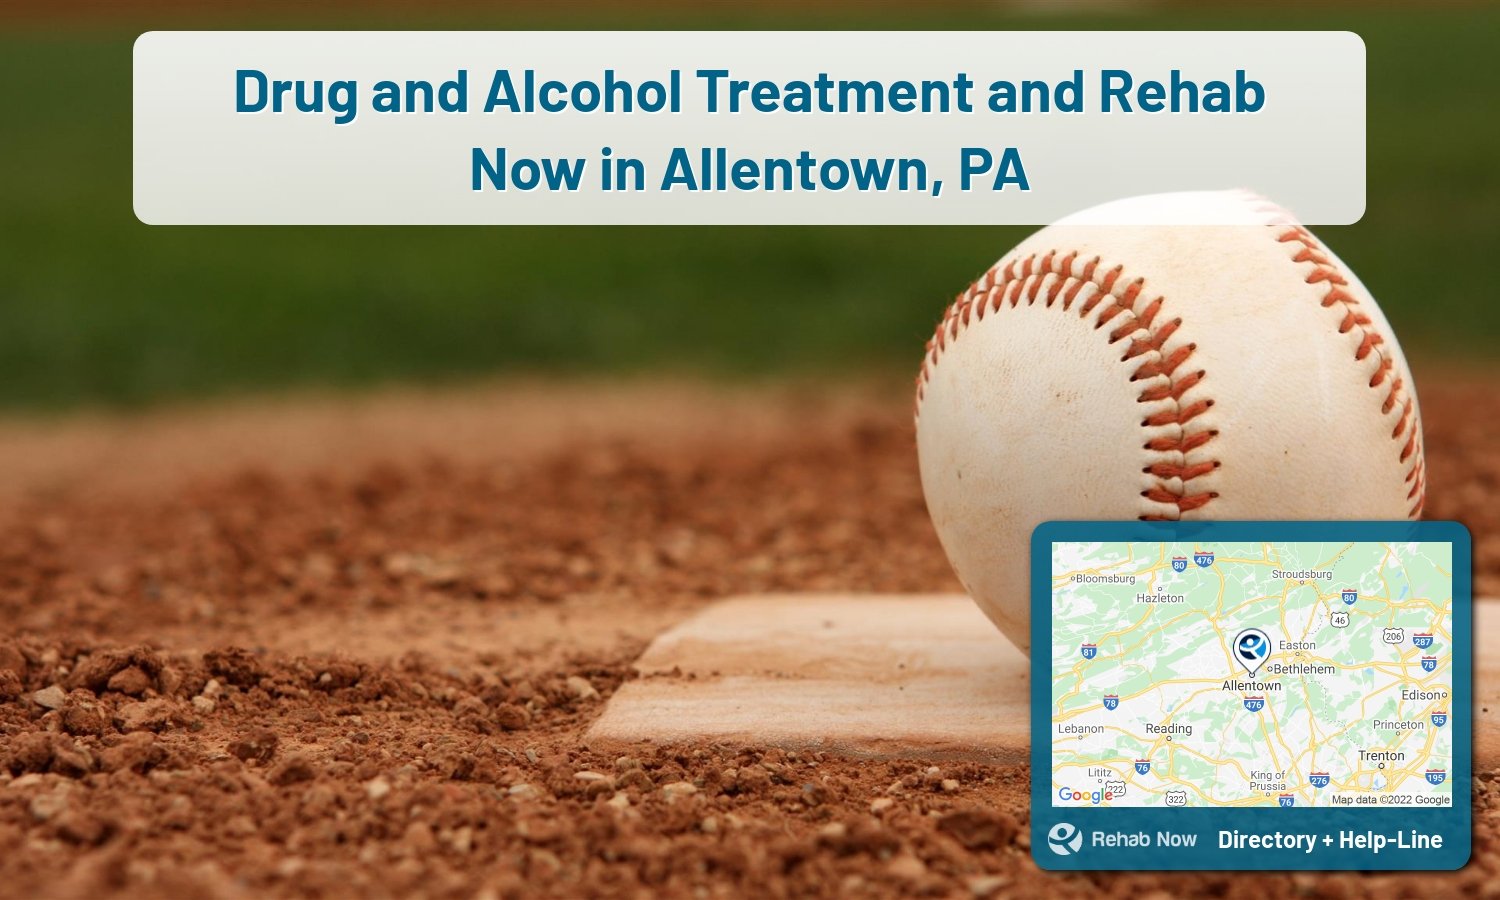 Ready to pick a rehab center in Allentown? Get off alcohol, opiates, and other drugs, by selecting top drug rehab centers in Pennsylvania